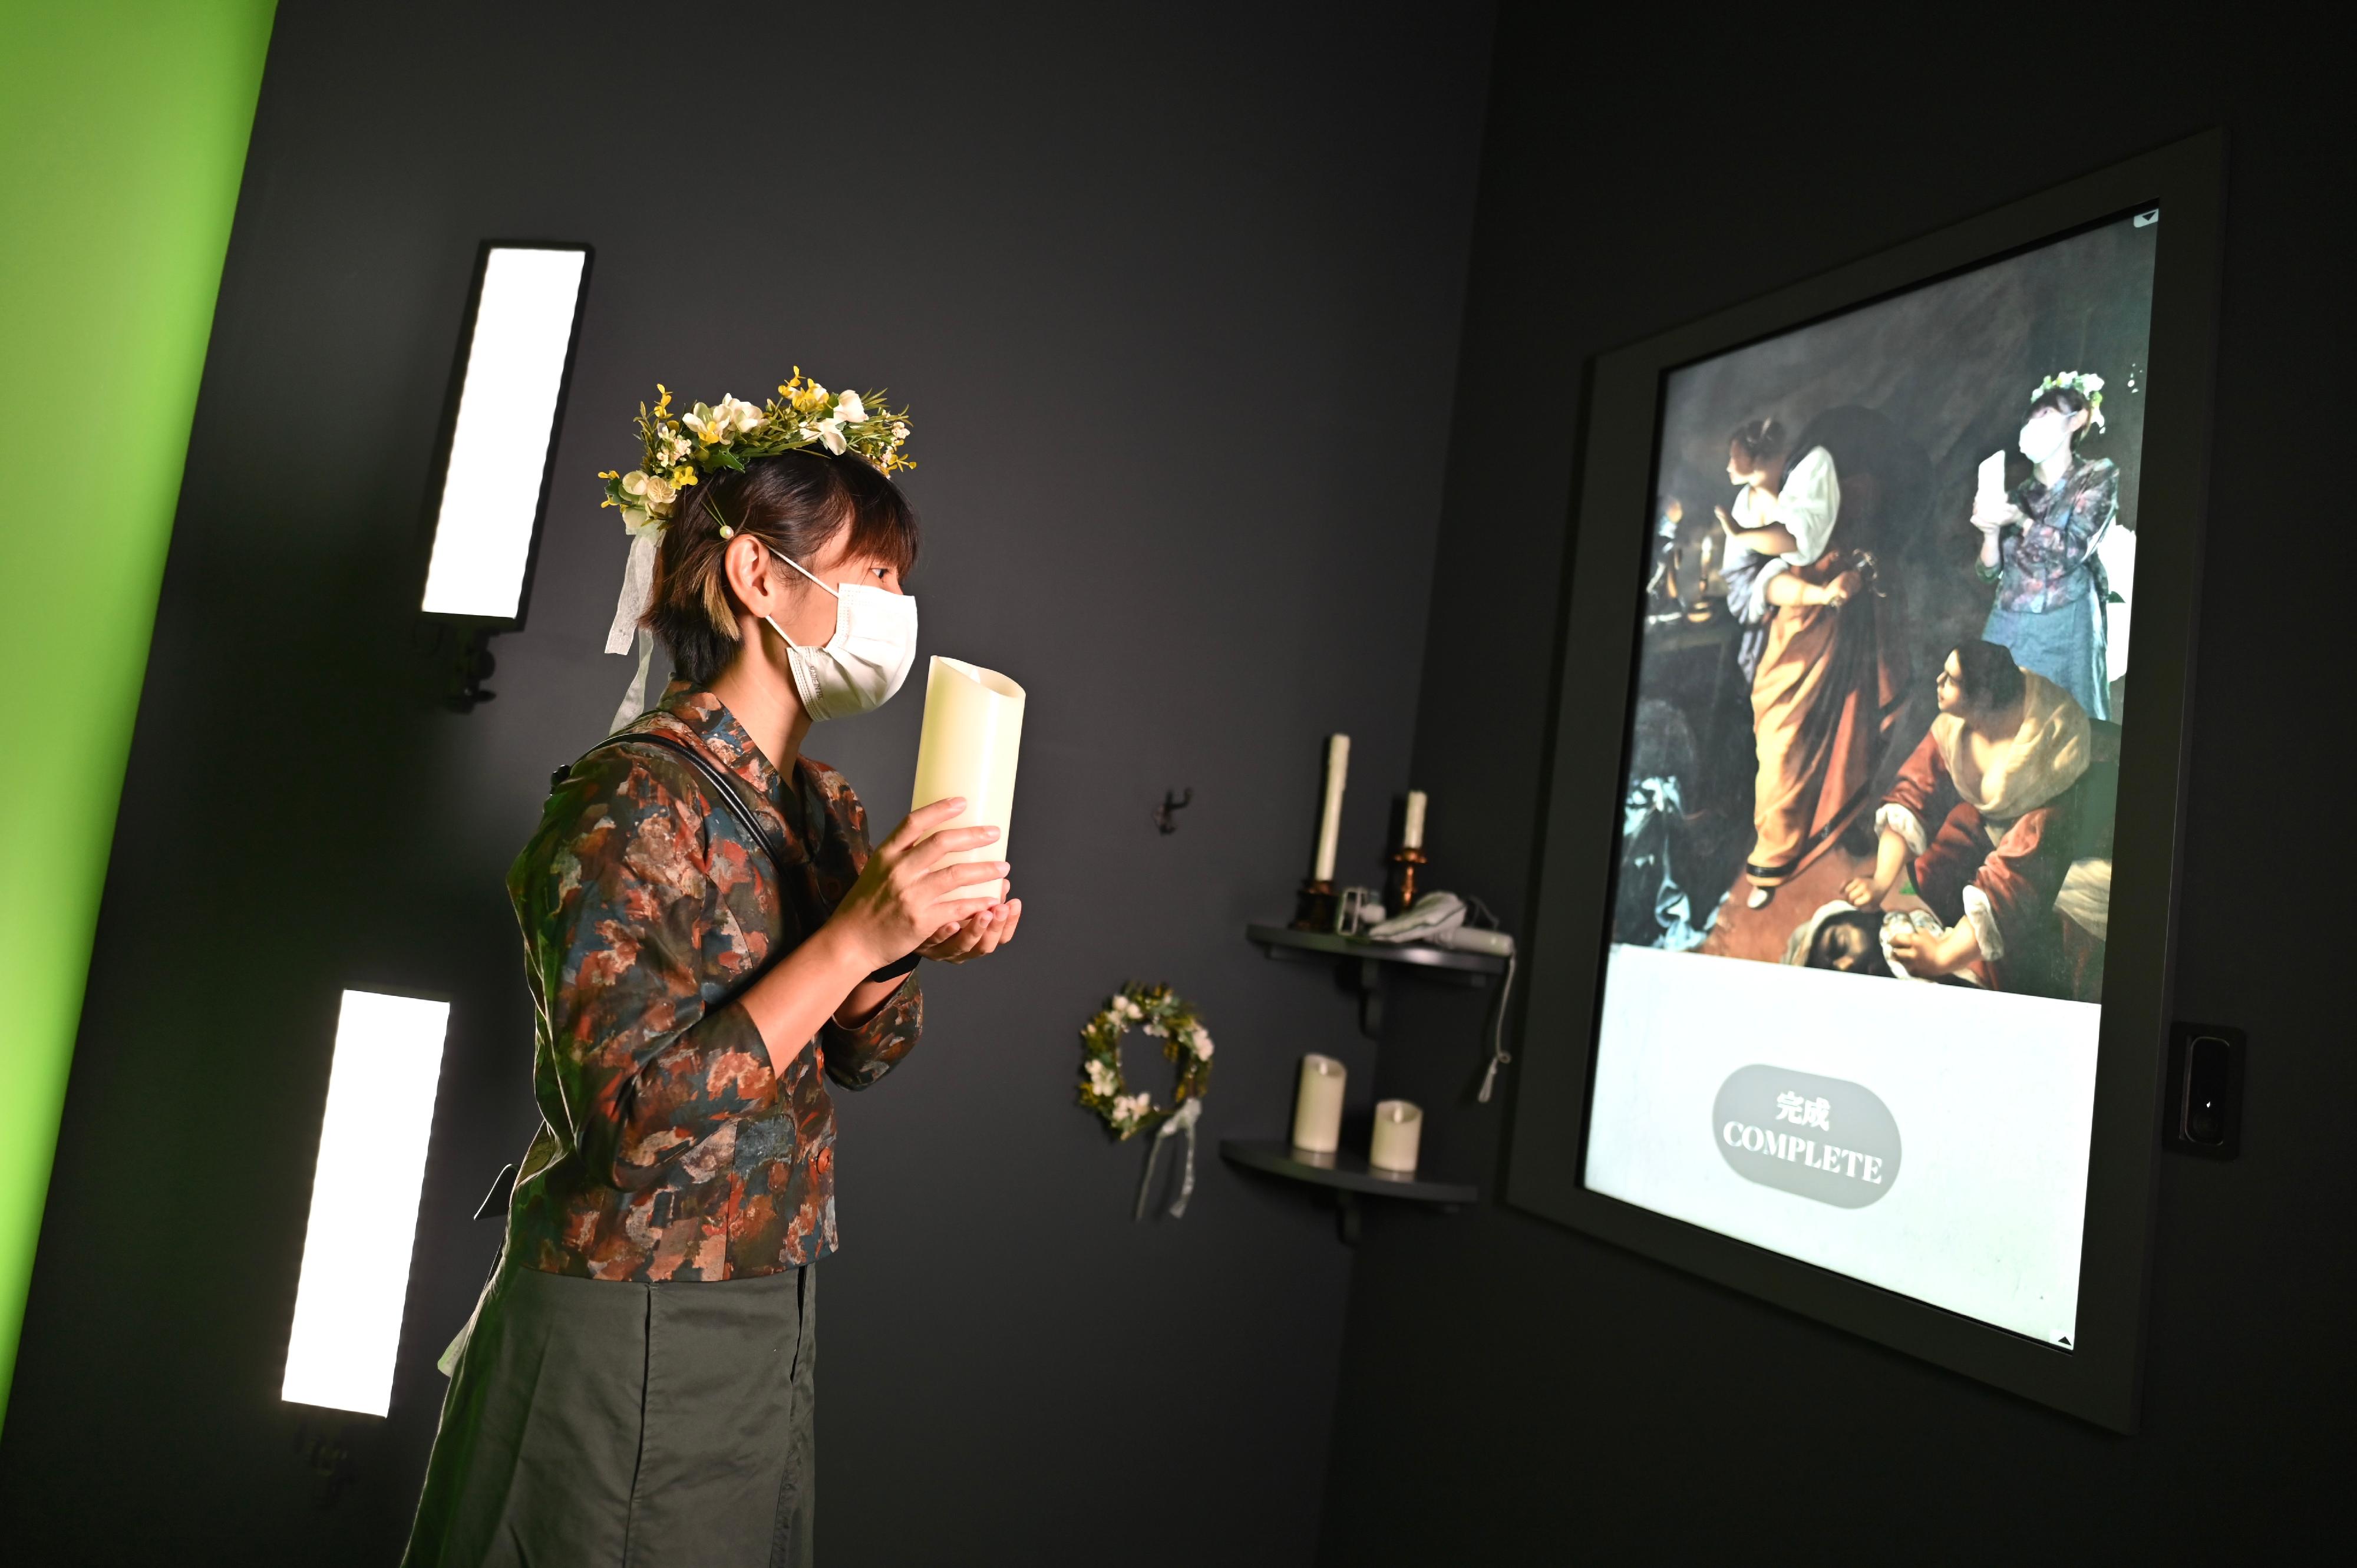 "The Hong Kong Jockey Club Series: The Road to the Baroque - Masterpieces from the Capodimonte Museum" exhibition will be held from tomorrow (July 15) at the Hong Kong Museum of Art. Picture shows an interactive installation at the education corner, where visitors can become part of a Baroque painting.